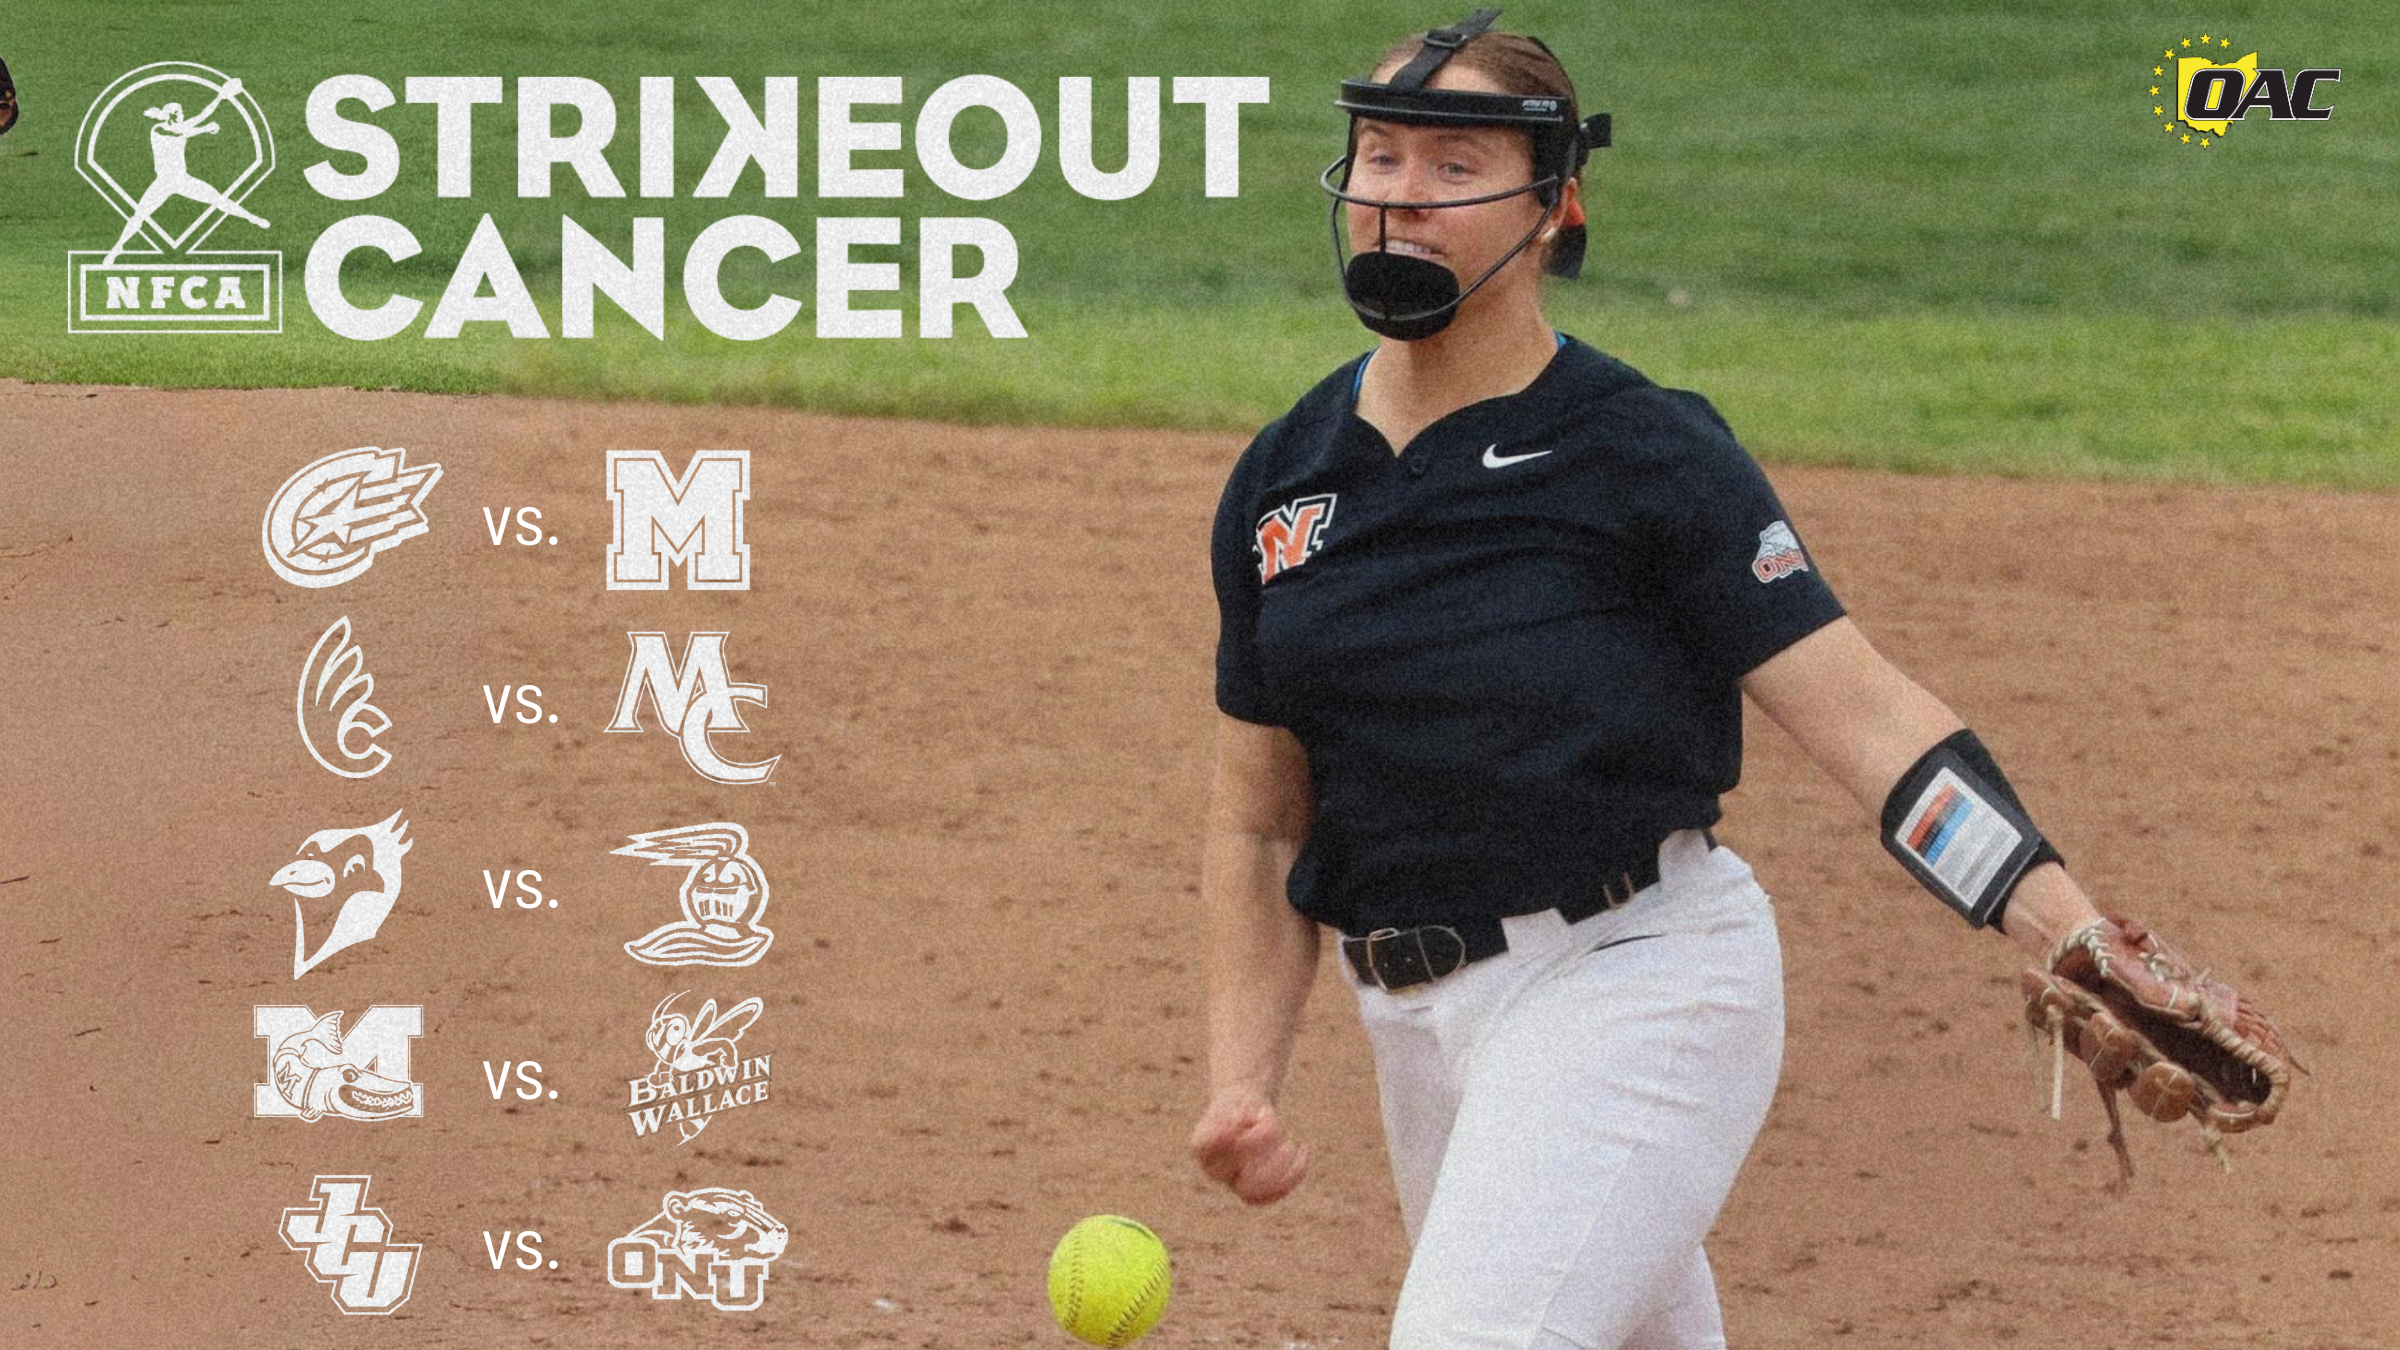 OAC Softball Teams Partner With NFCA's Strikeout Cancer Initiative